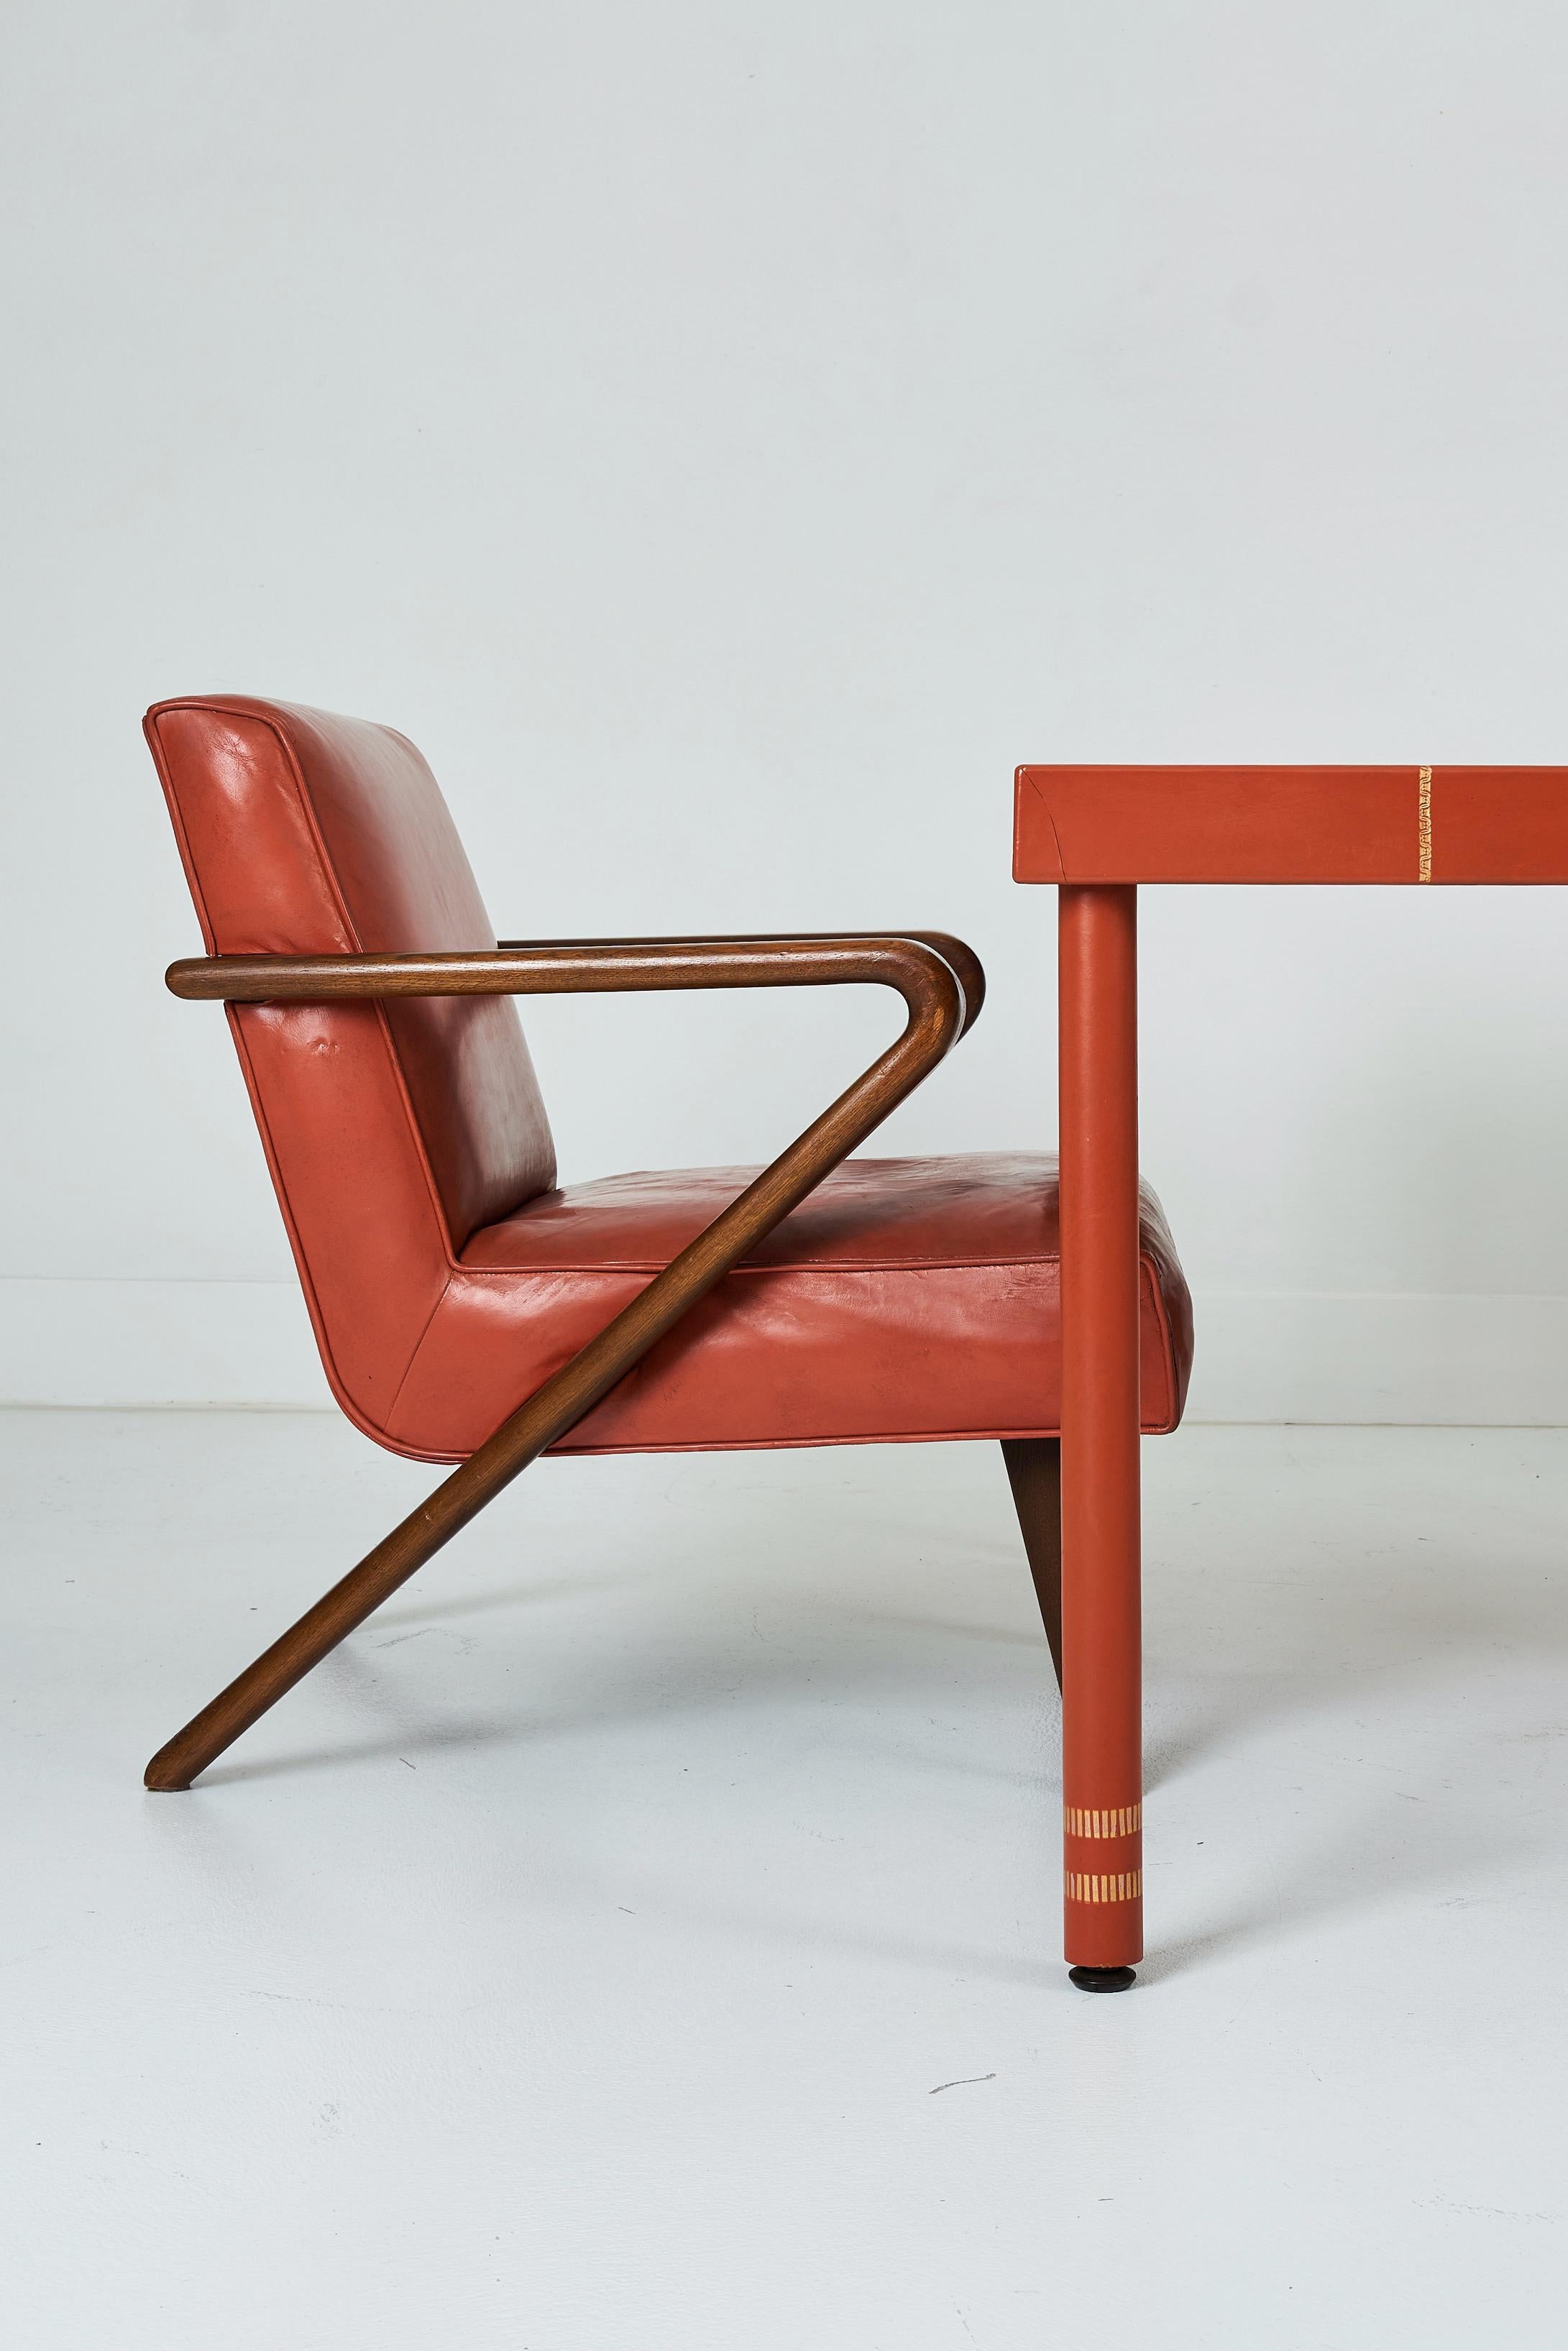 Mid-20th Century A Leather Wrapped Desk and Matching Arm Chairs designed by William Haines